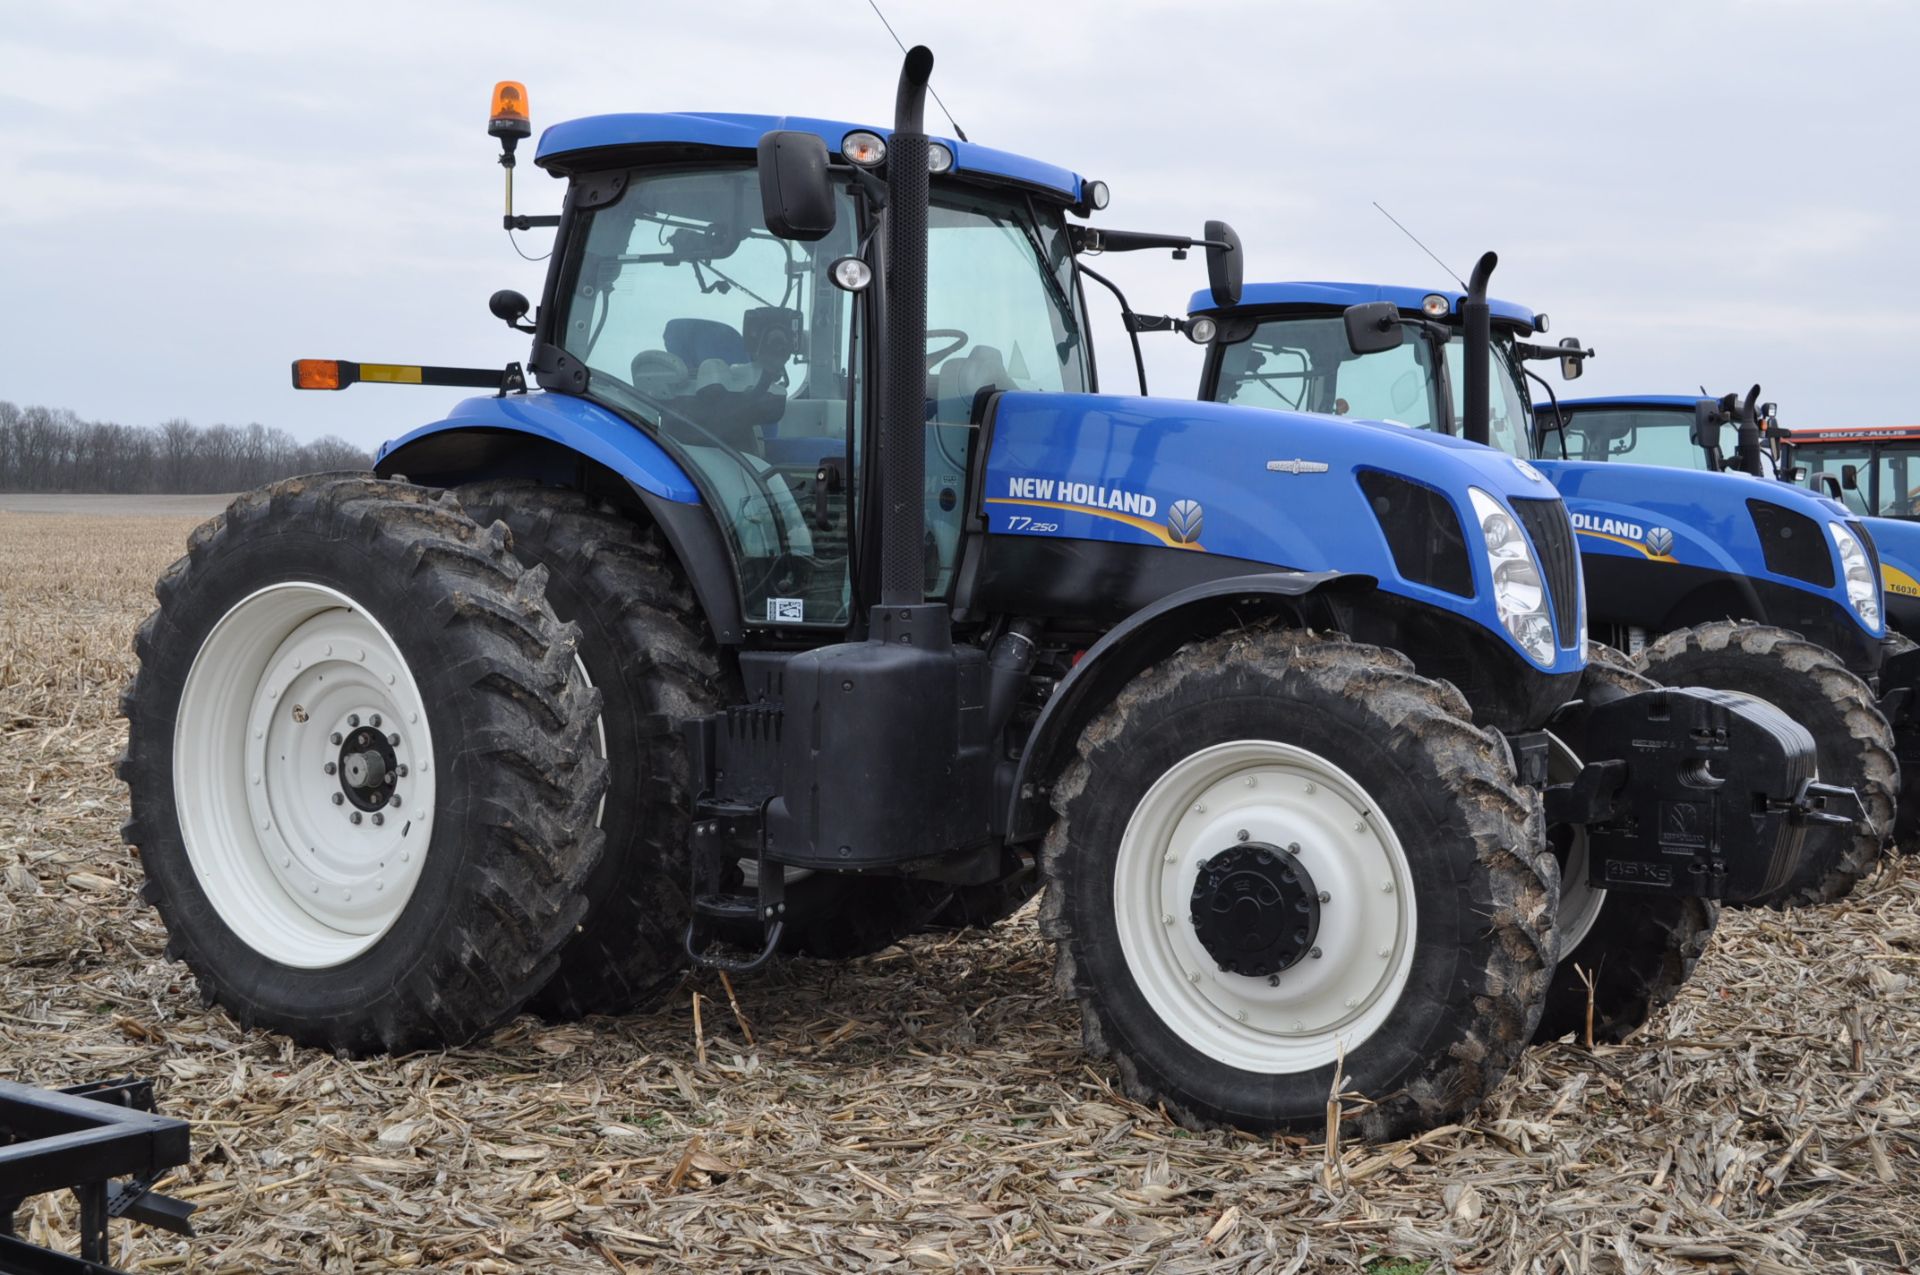 New Holland T7.250 tractor, 480/80 R 46 duals, Michelin 380/85 R 34 front, Super Steer, front wts, - Image 4 of 28